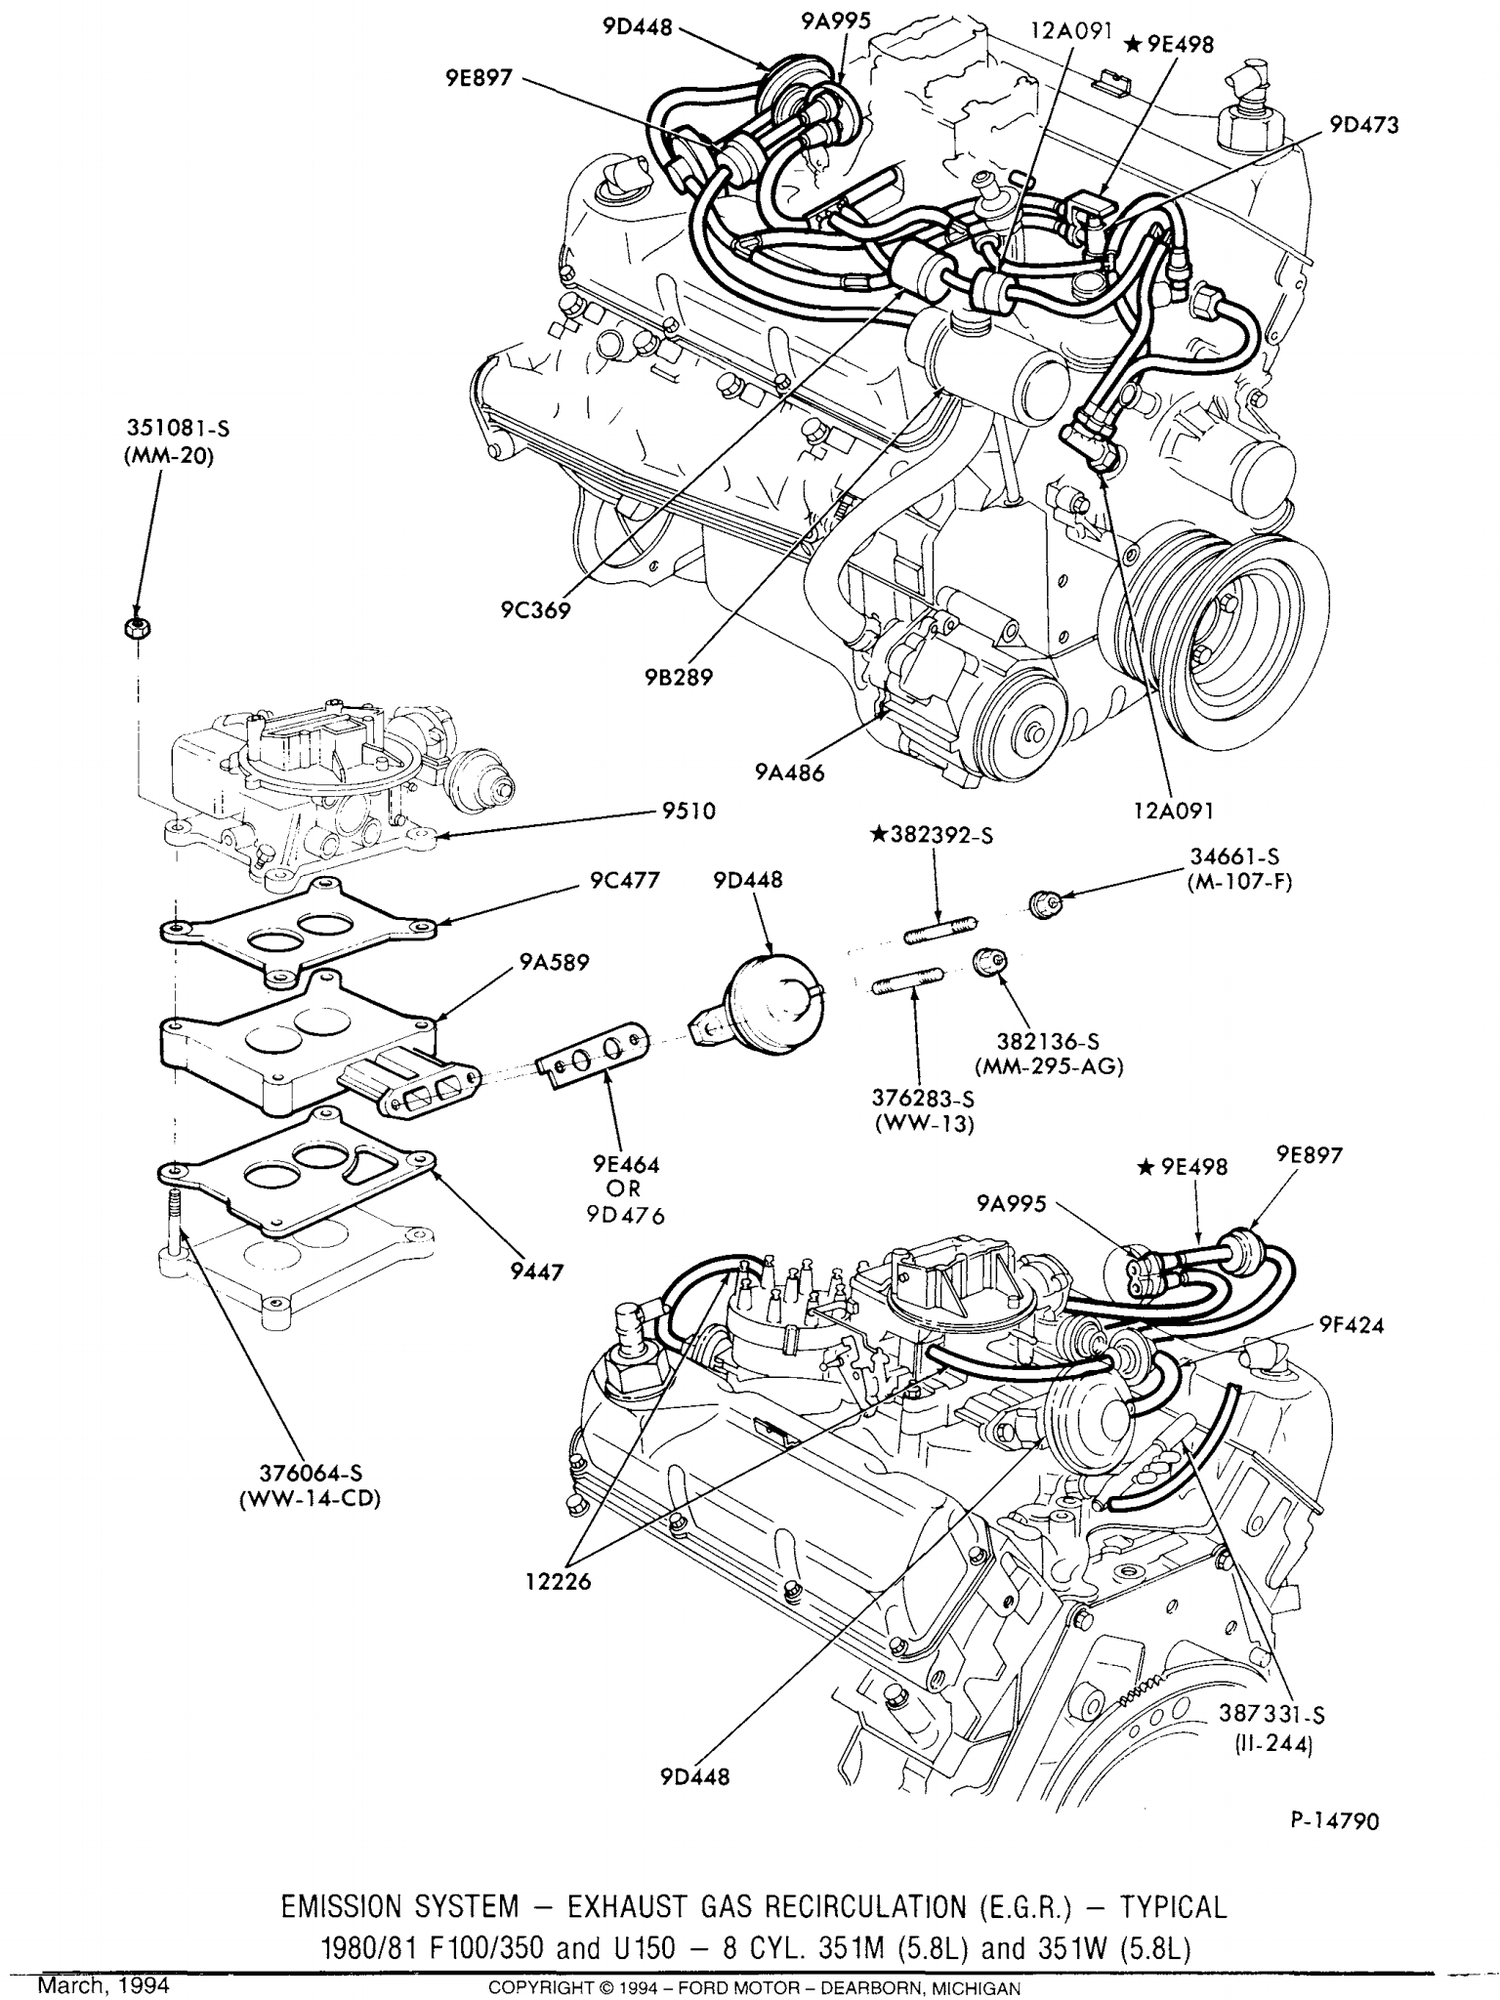 Fuel System Pages - Help, Please - Ford Truck Enthusiasts Forums